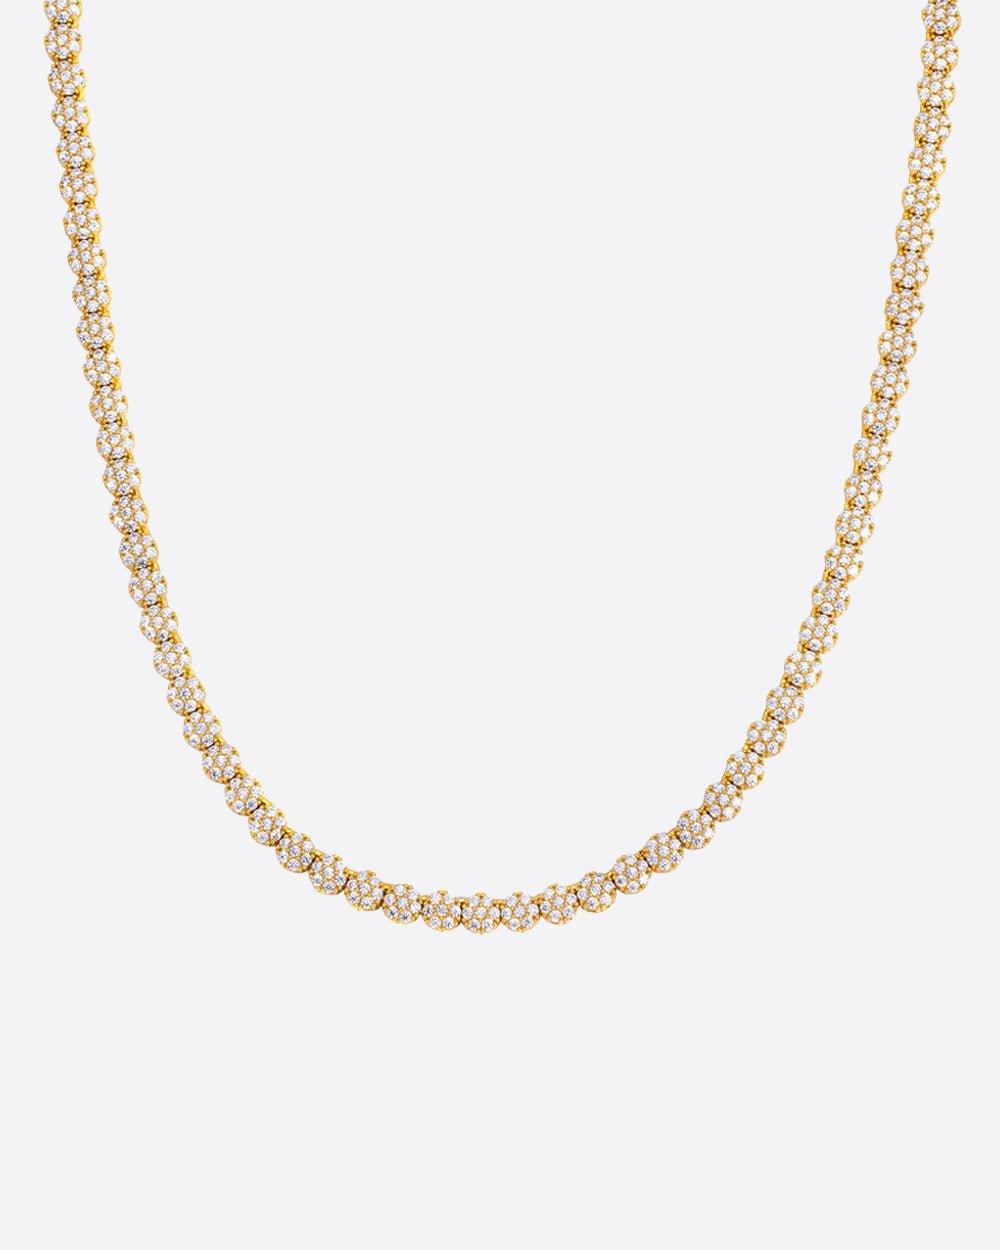 FLOWER TENNIS CHAIN CHAIN. - 8MM 18K GOLD - DRIP IN THE JEWEL